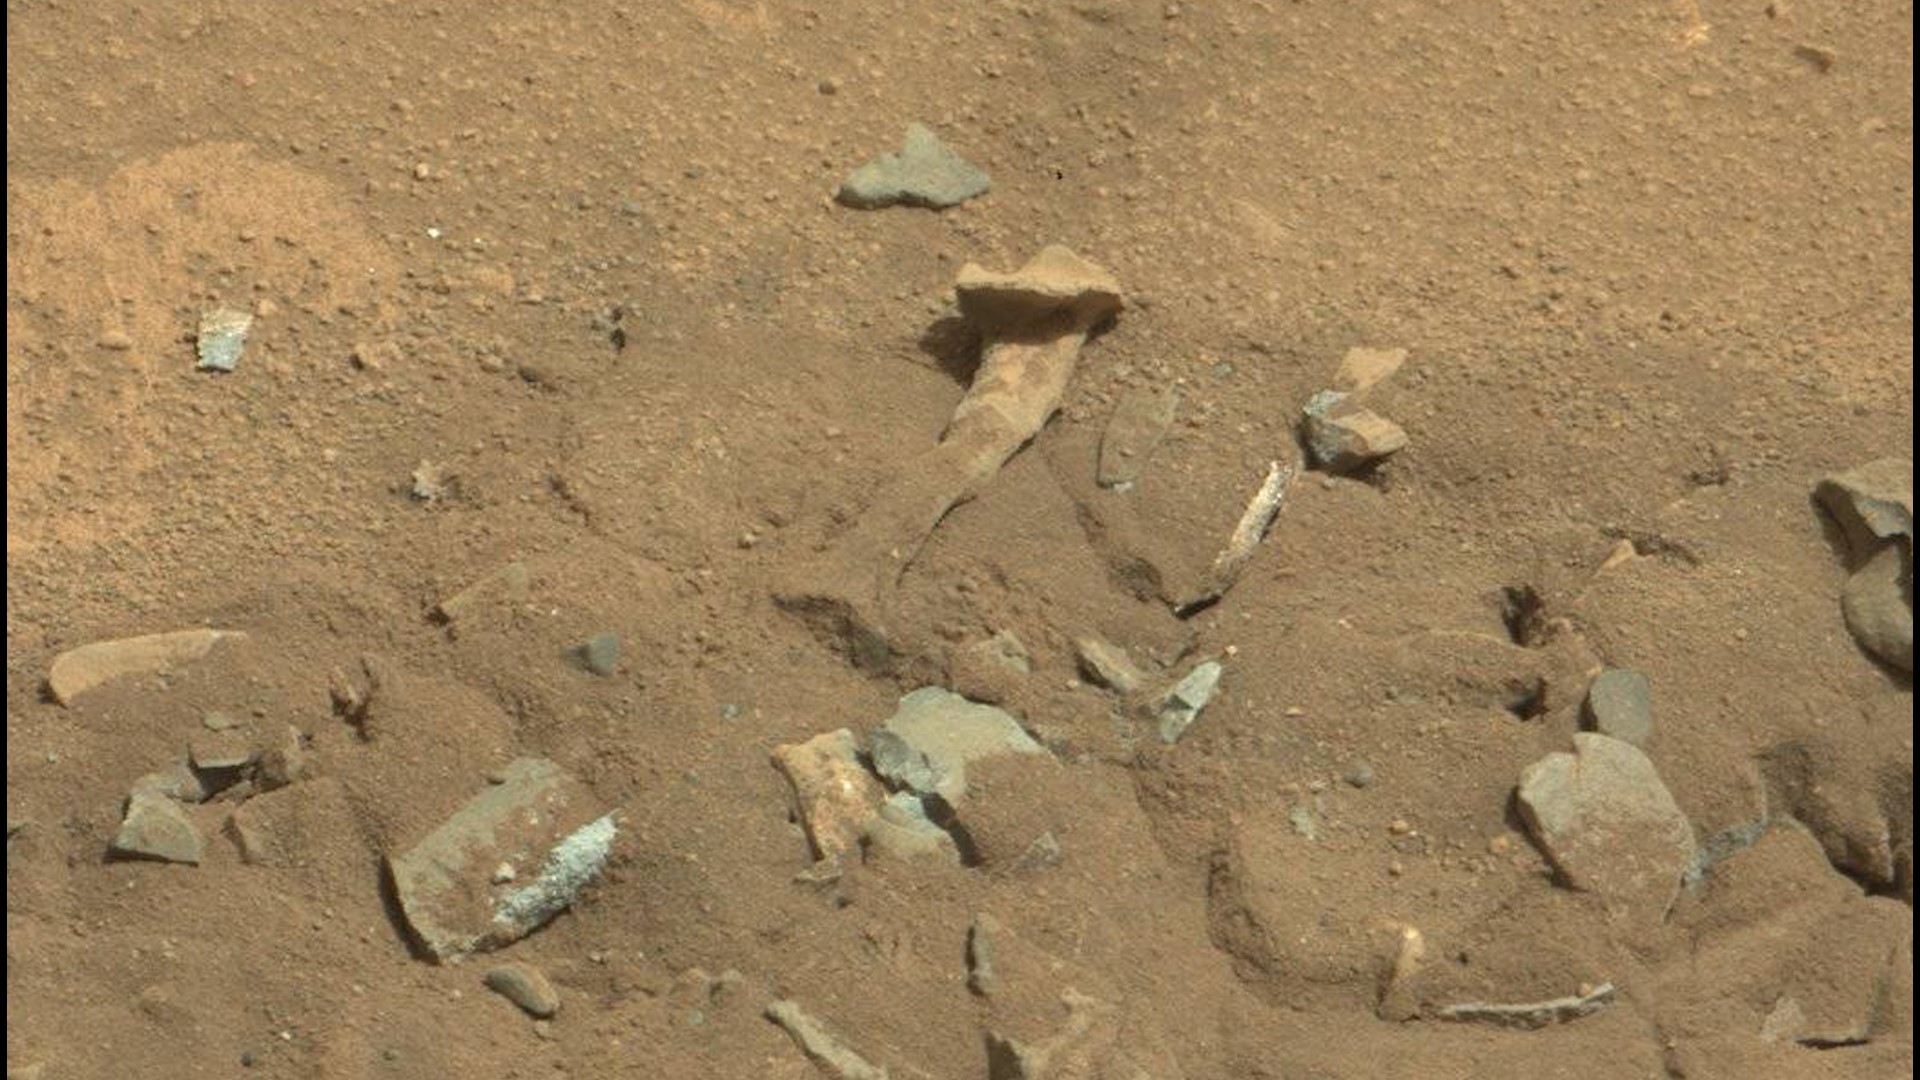 Sorry, conspiracy theorists! Unfortunately, it's not a sign of alien life on Mars.